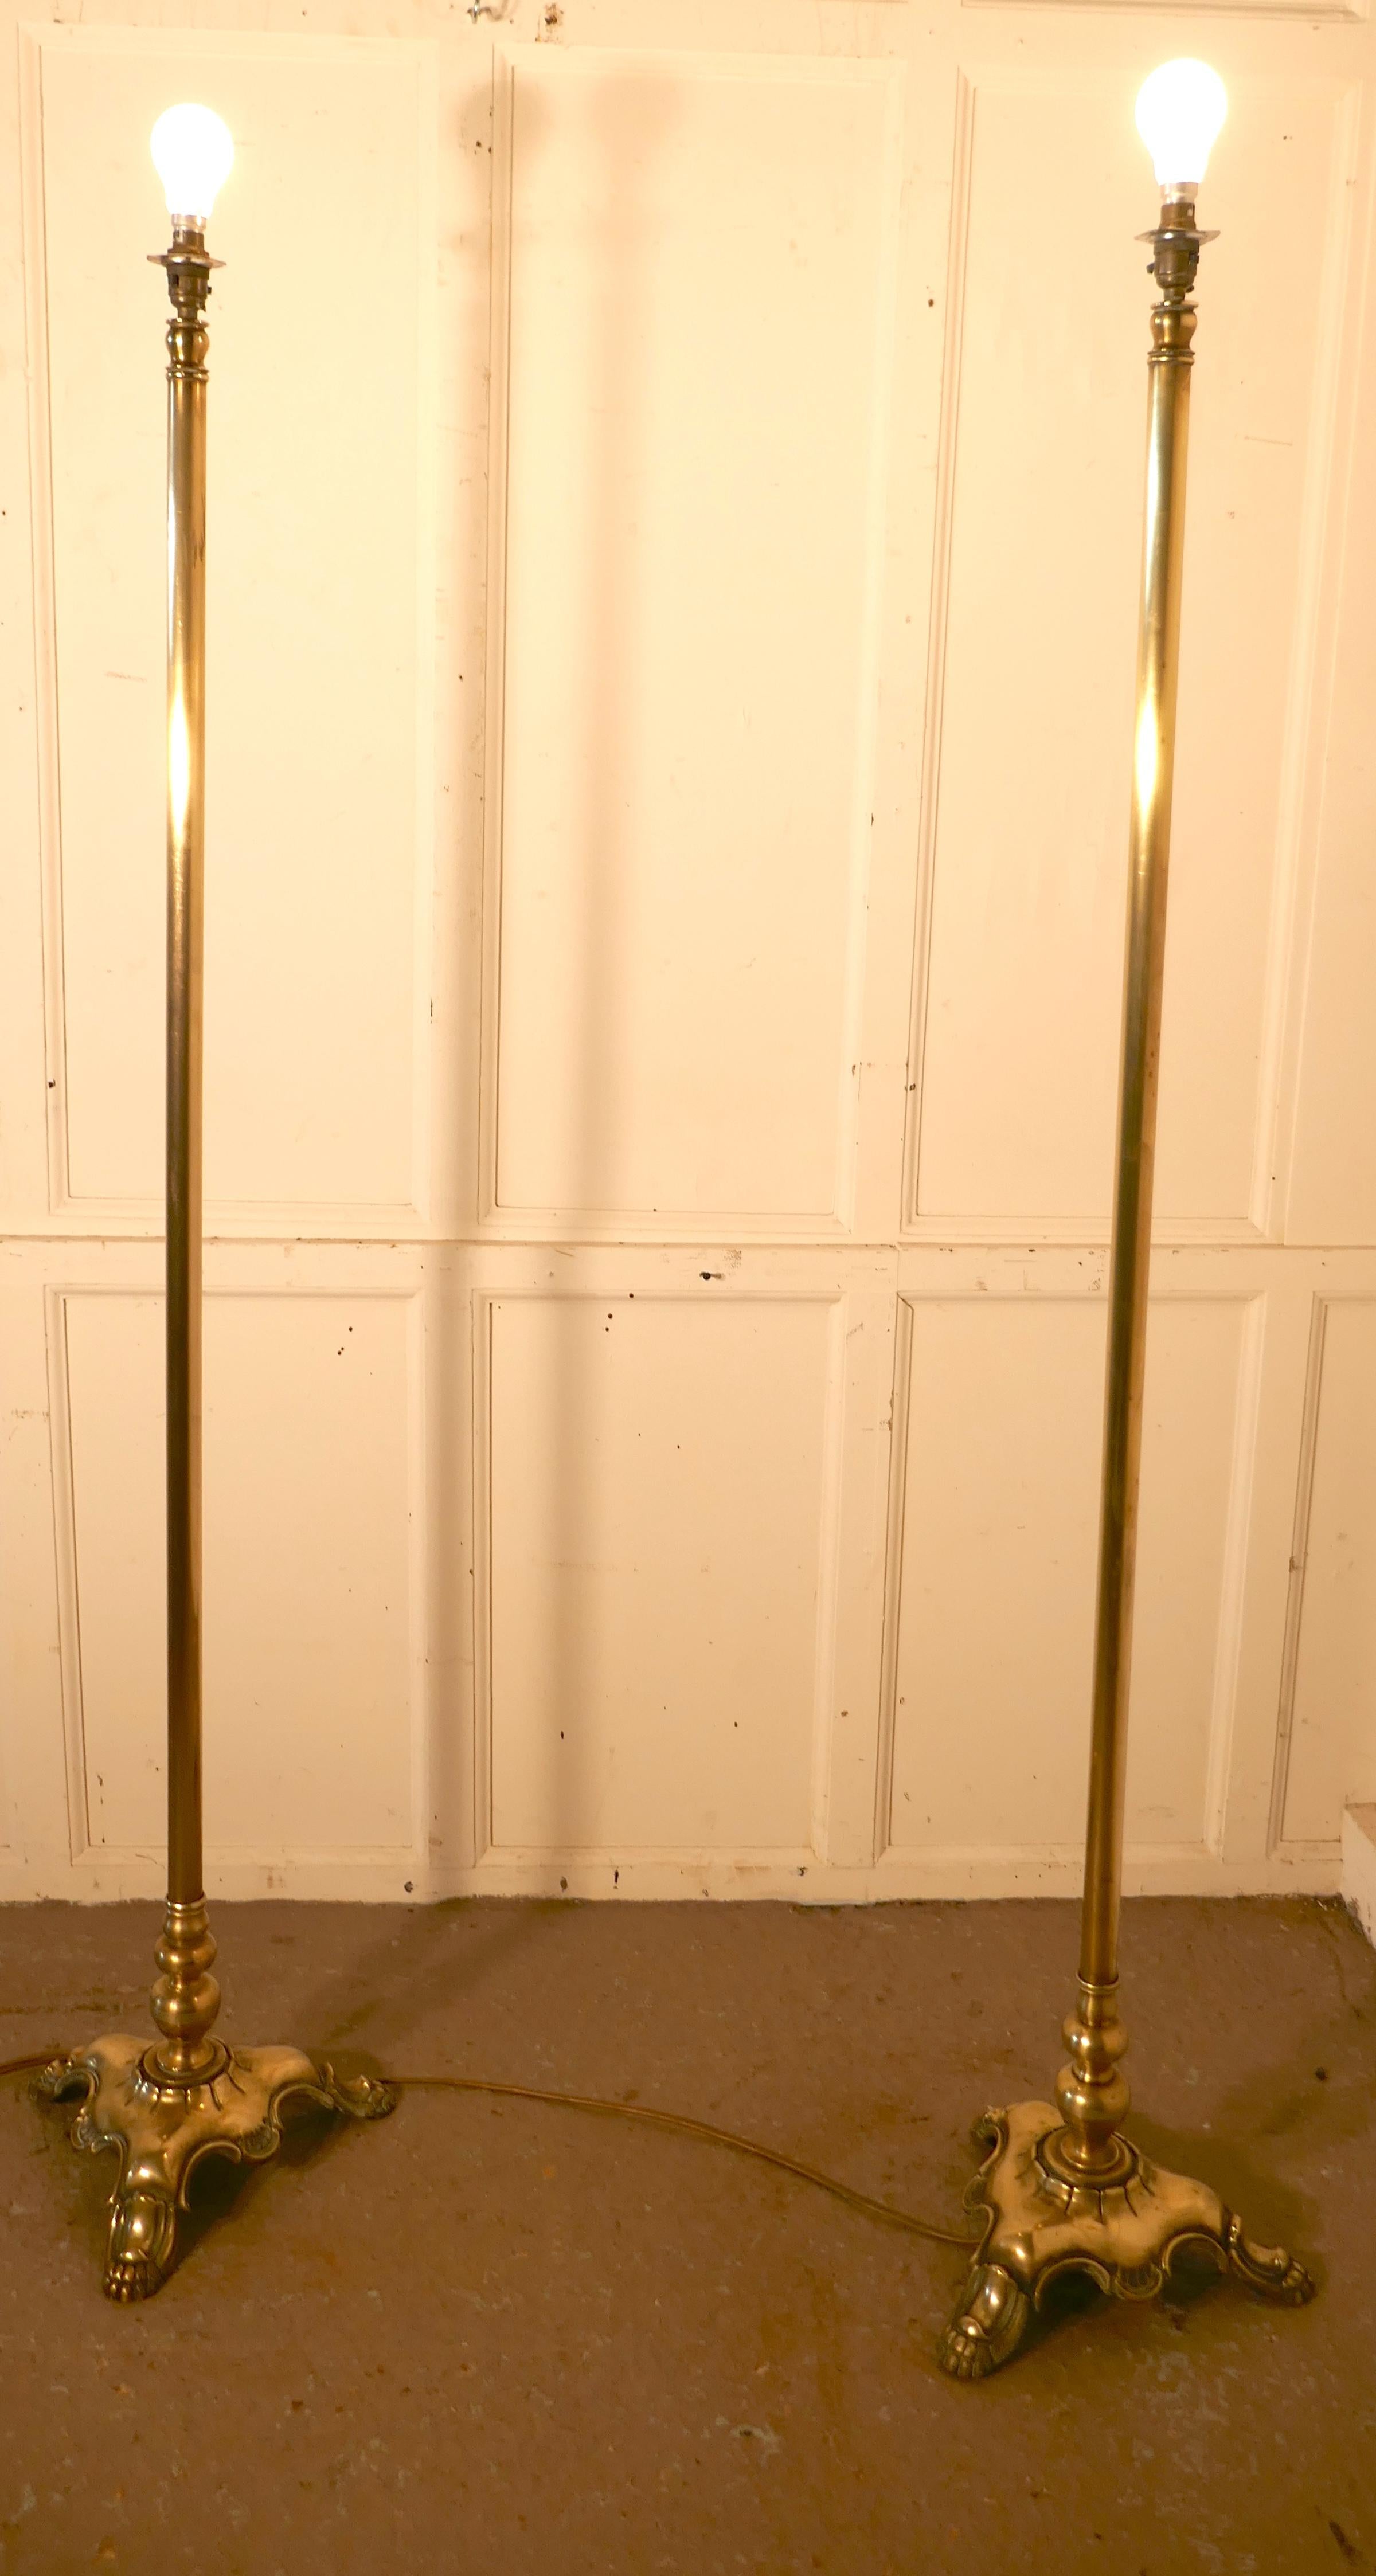 Pair of Tall Heavy Floor Lamps, Brass Arts & Crafts Standard Lamps 1